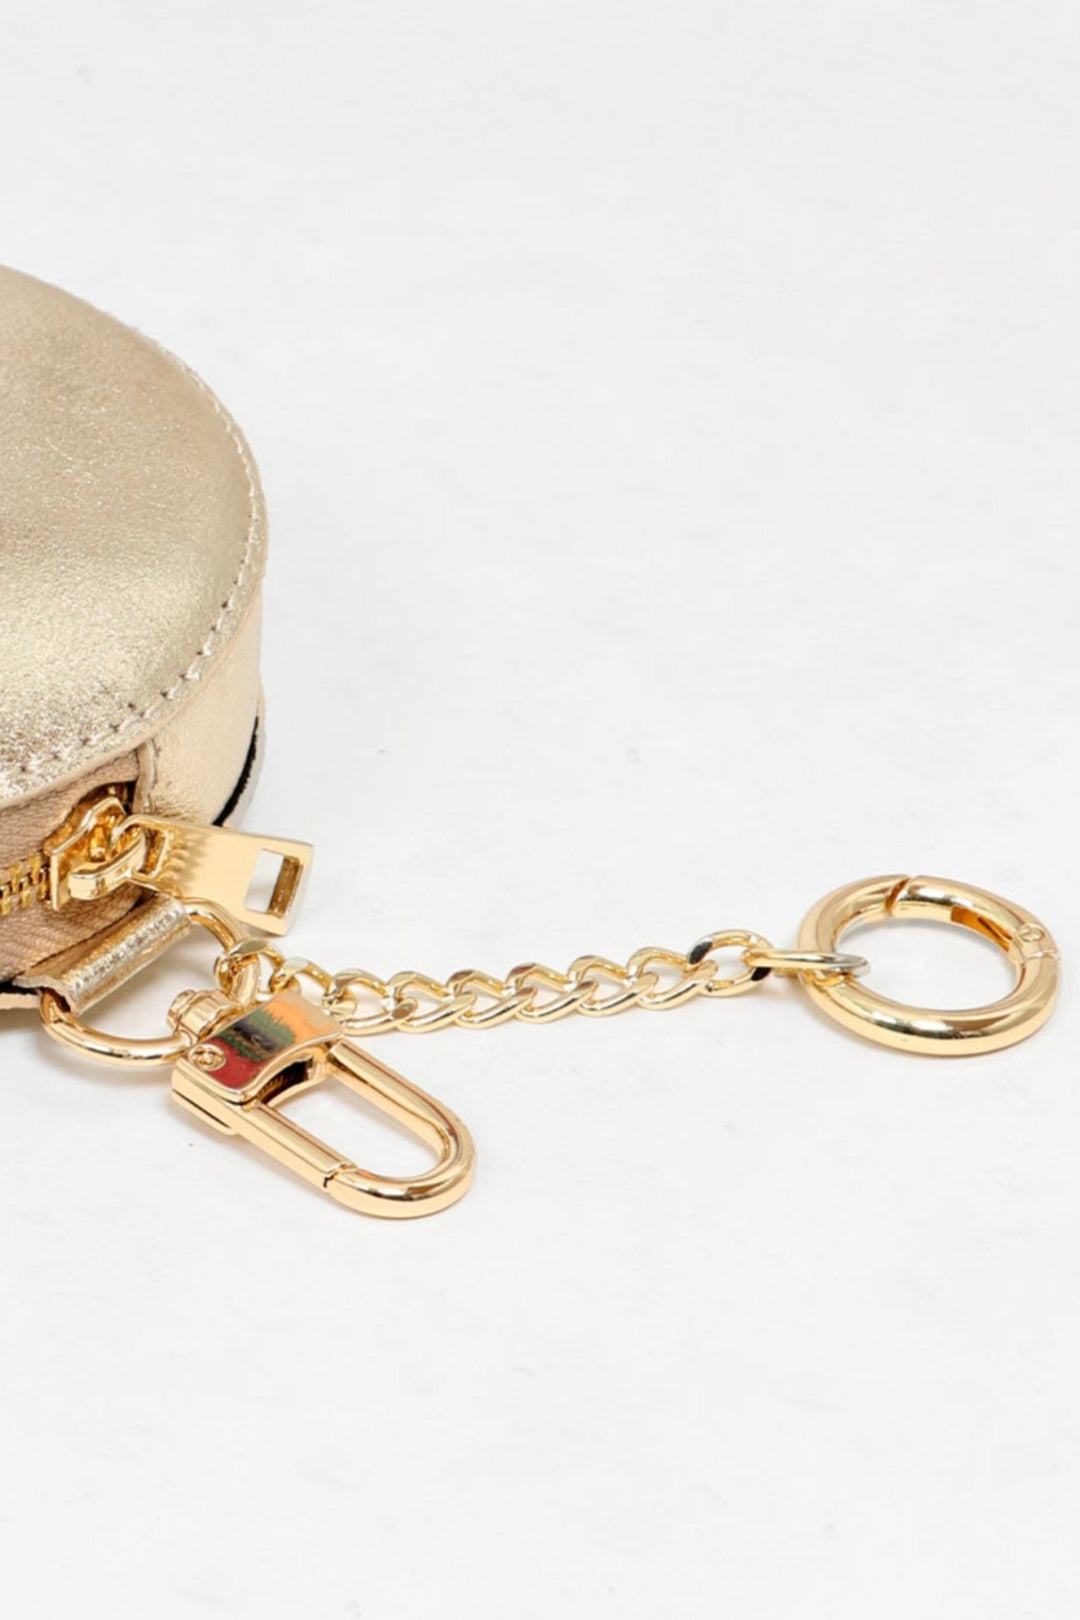 Gold Leather Round Clip-On Coin Purse